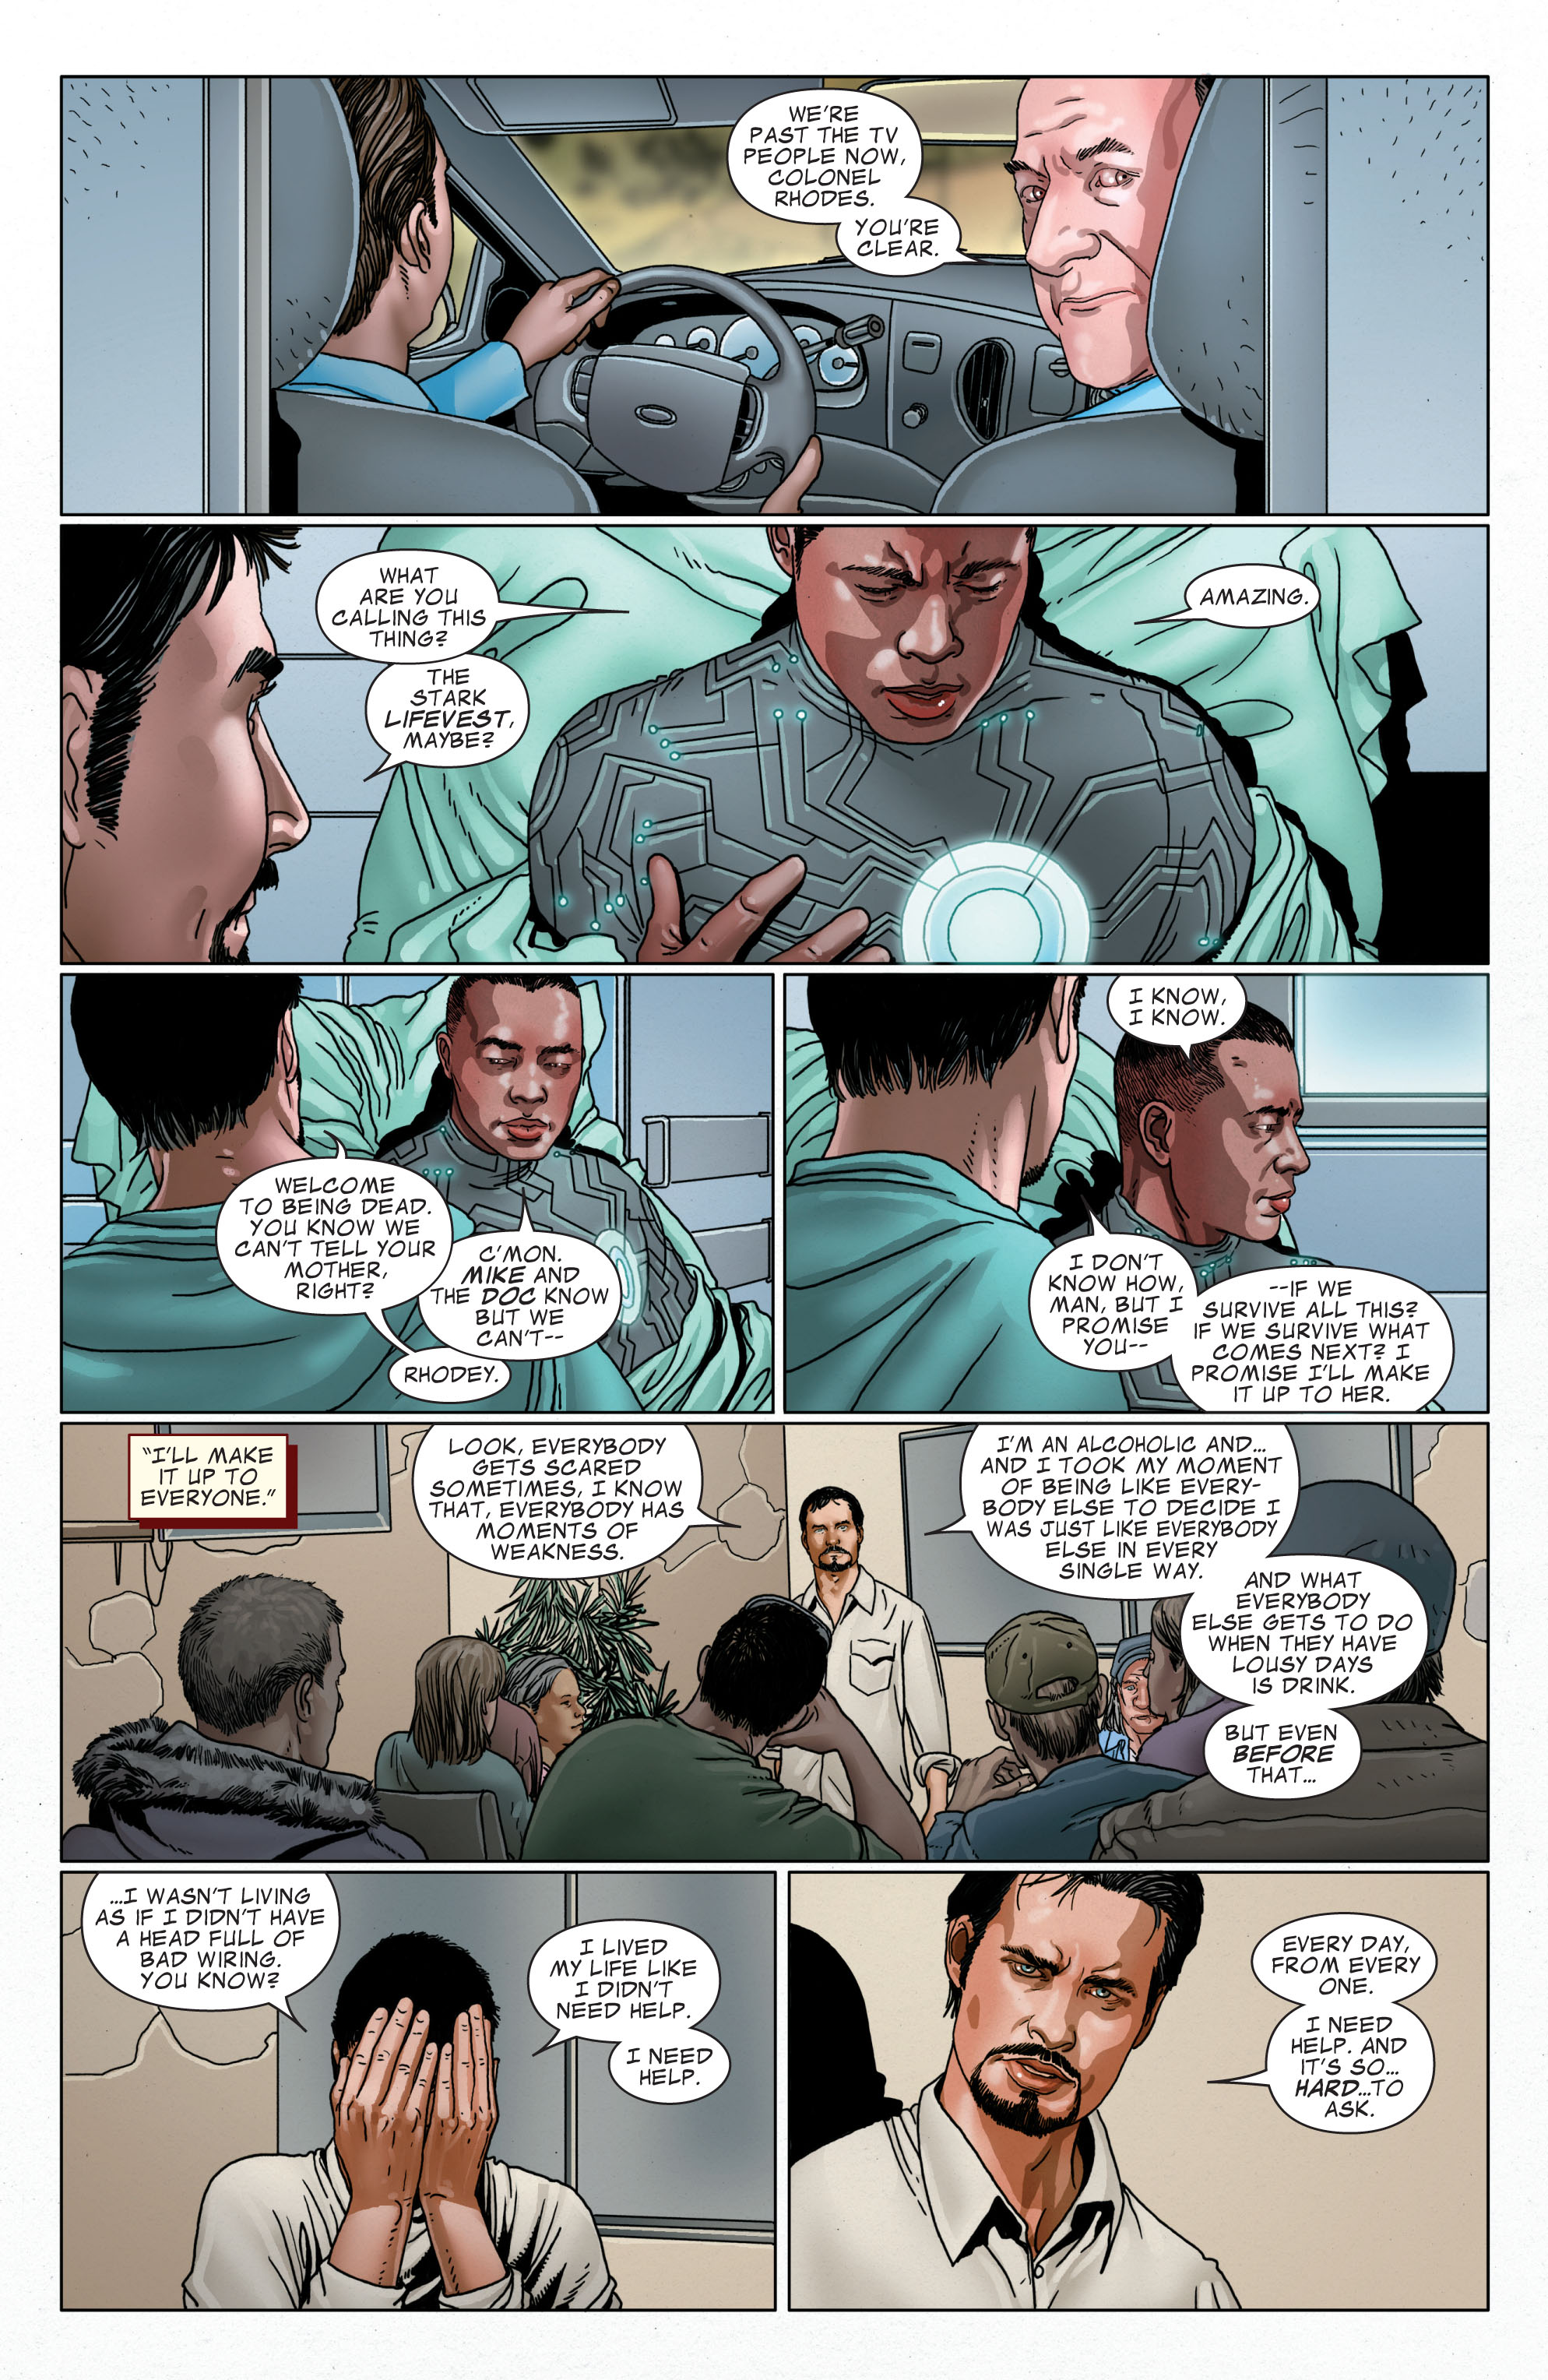 Invincible Iron Man (2008) 515 Page 20